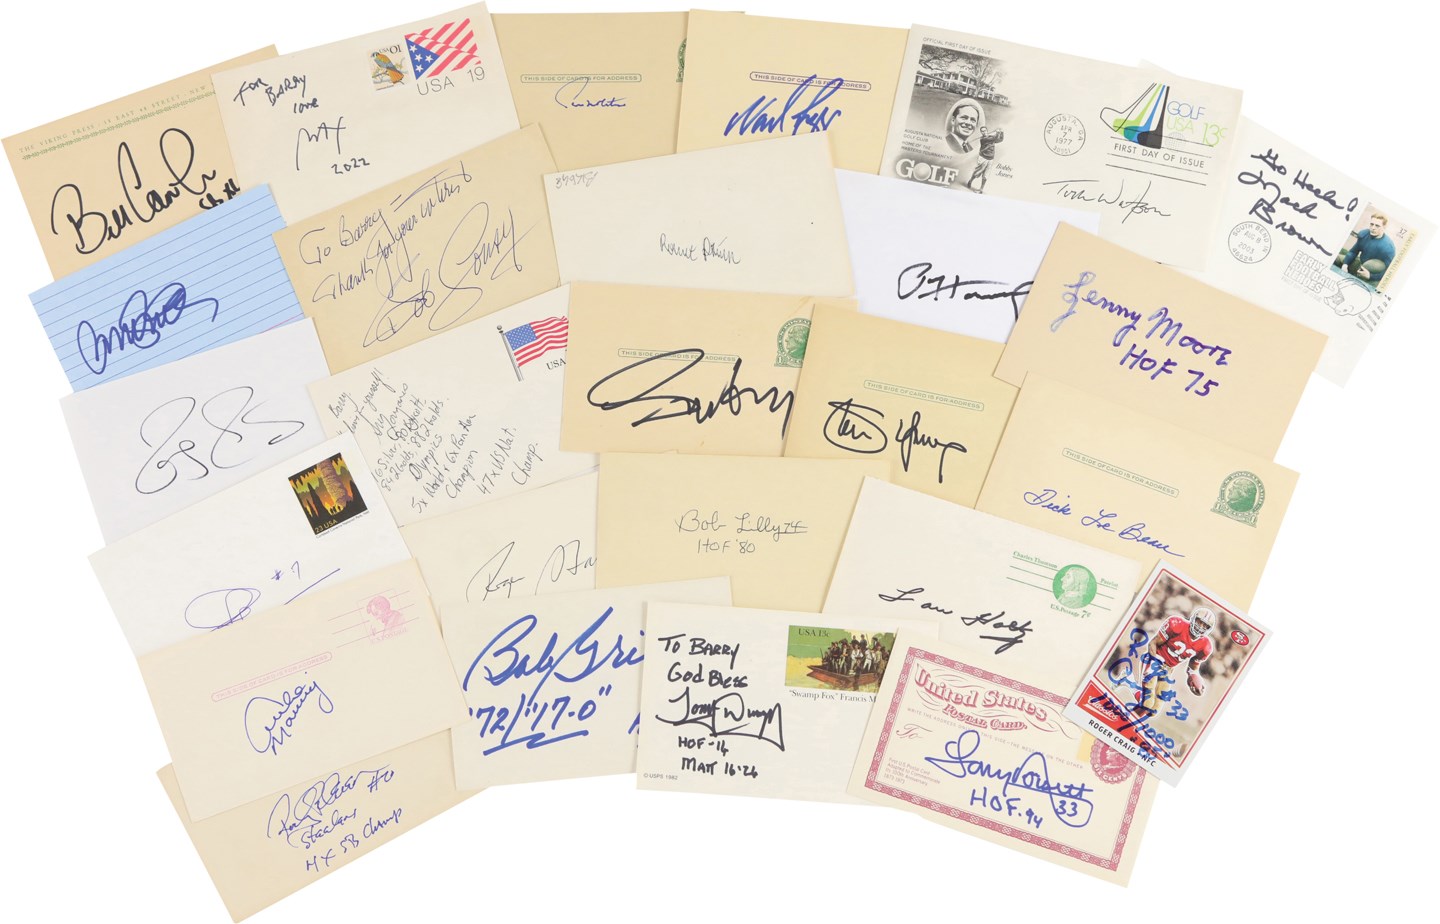 Baseball Autographs - Large Multi-Sport Autograph Collection with Hall of Fame Legends (700+)